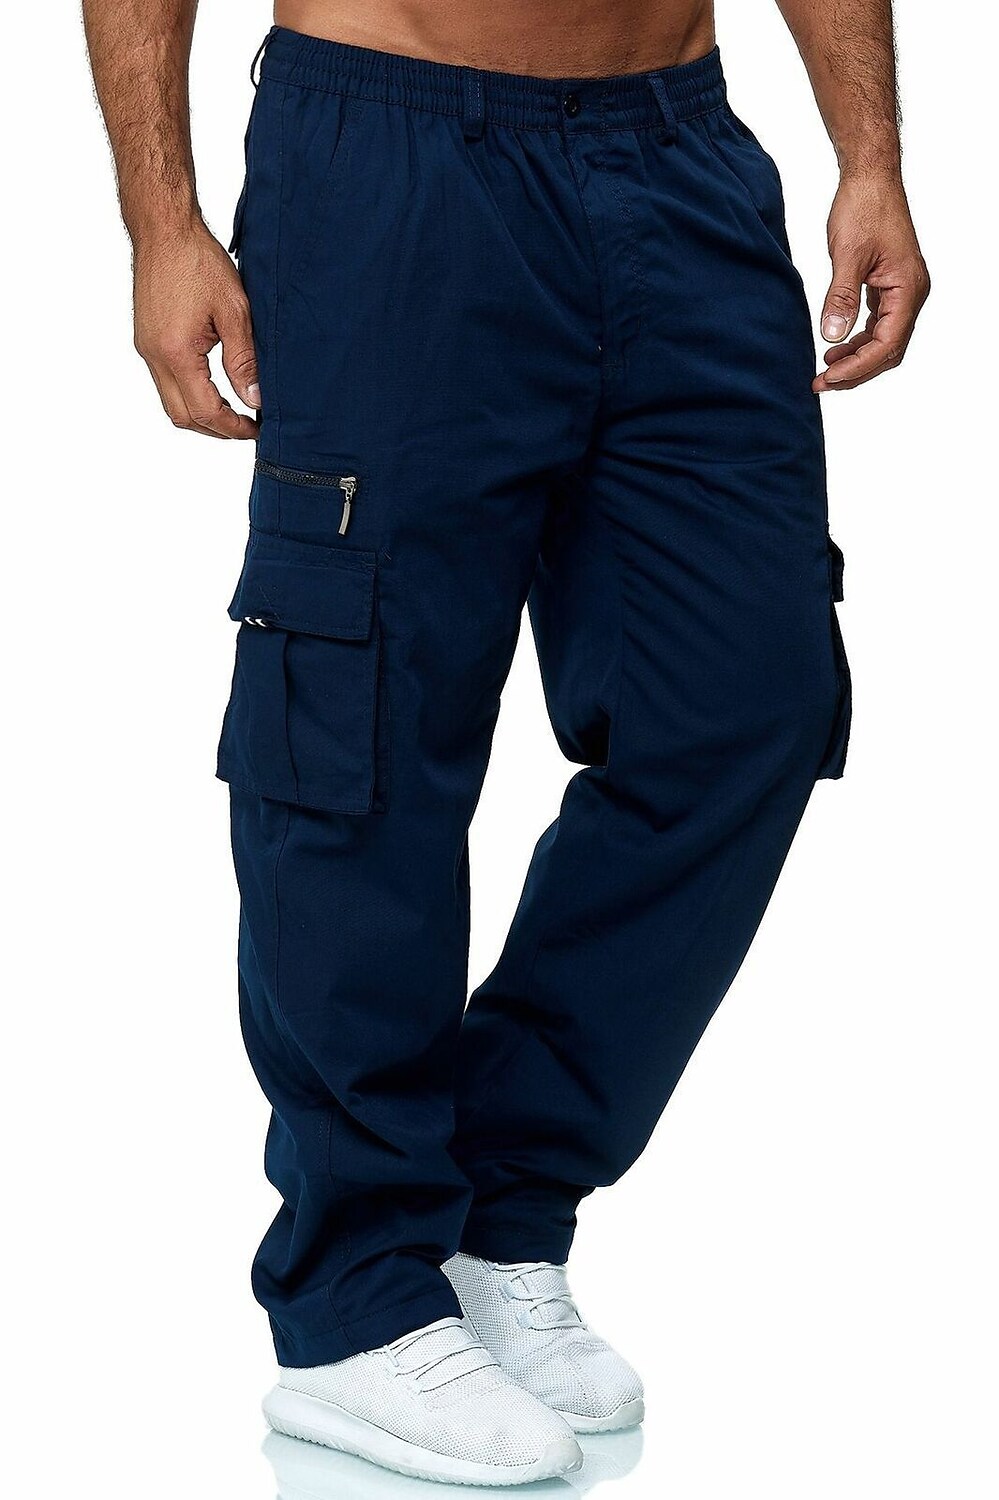 Men's Simple Casual Straight Cargo Pants